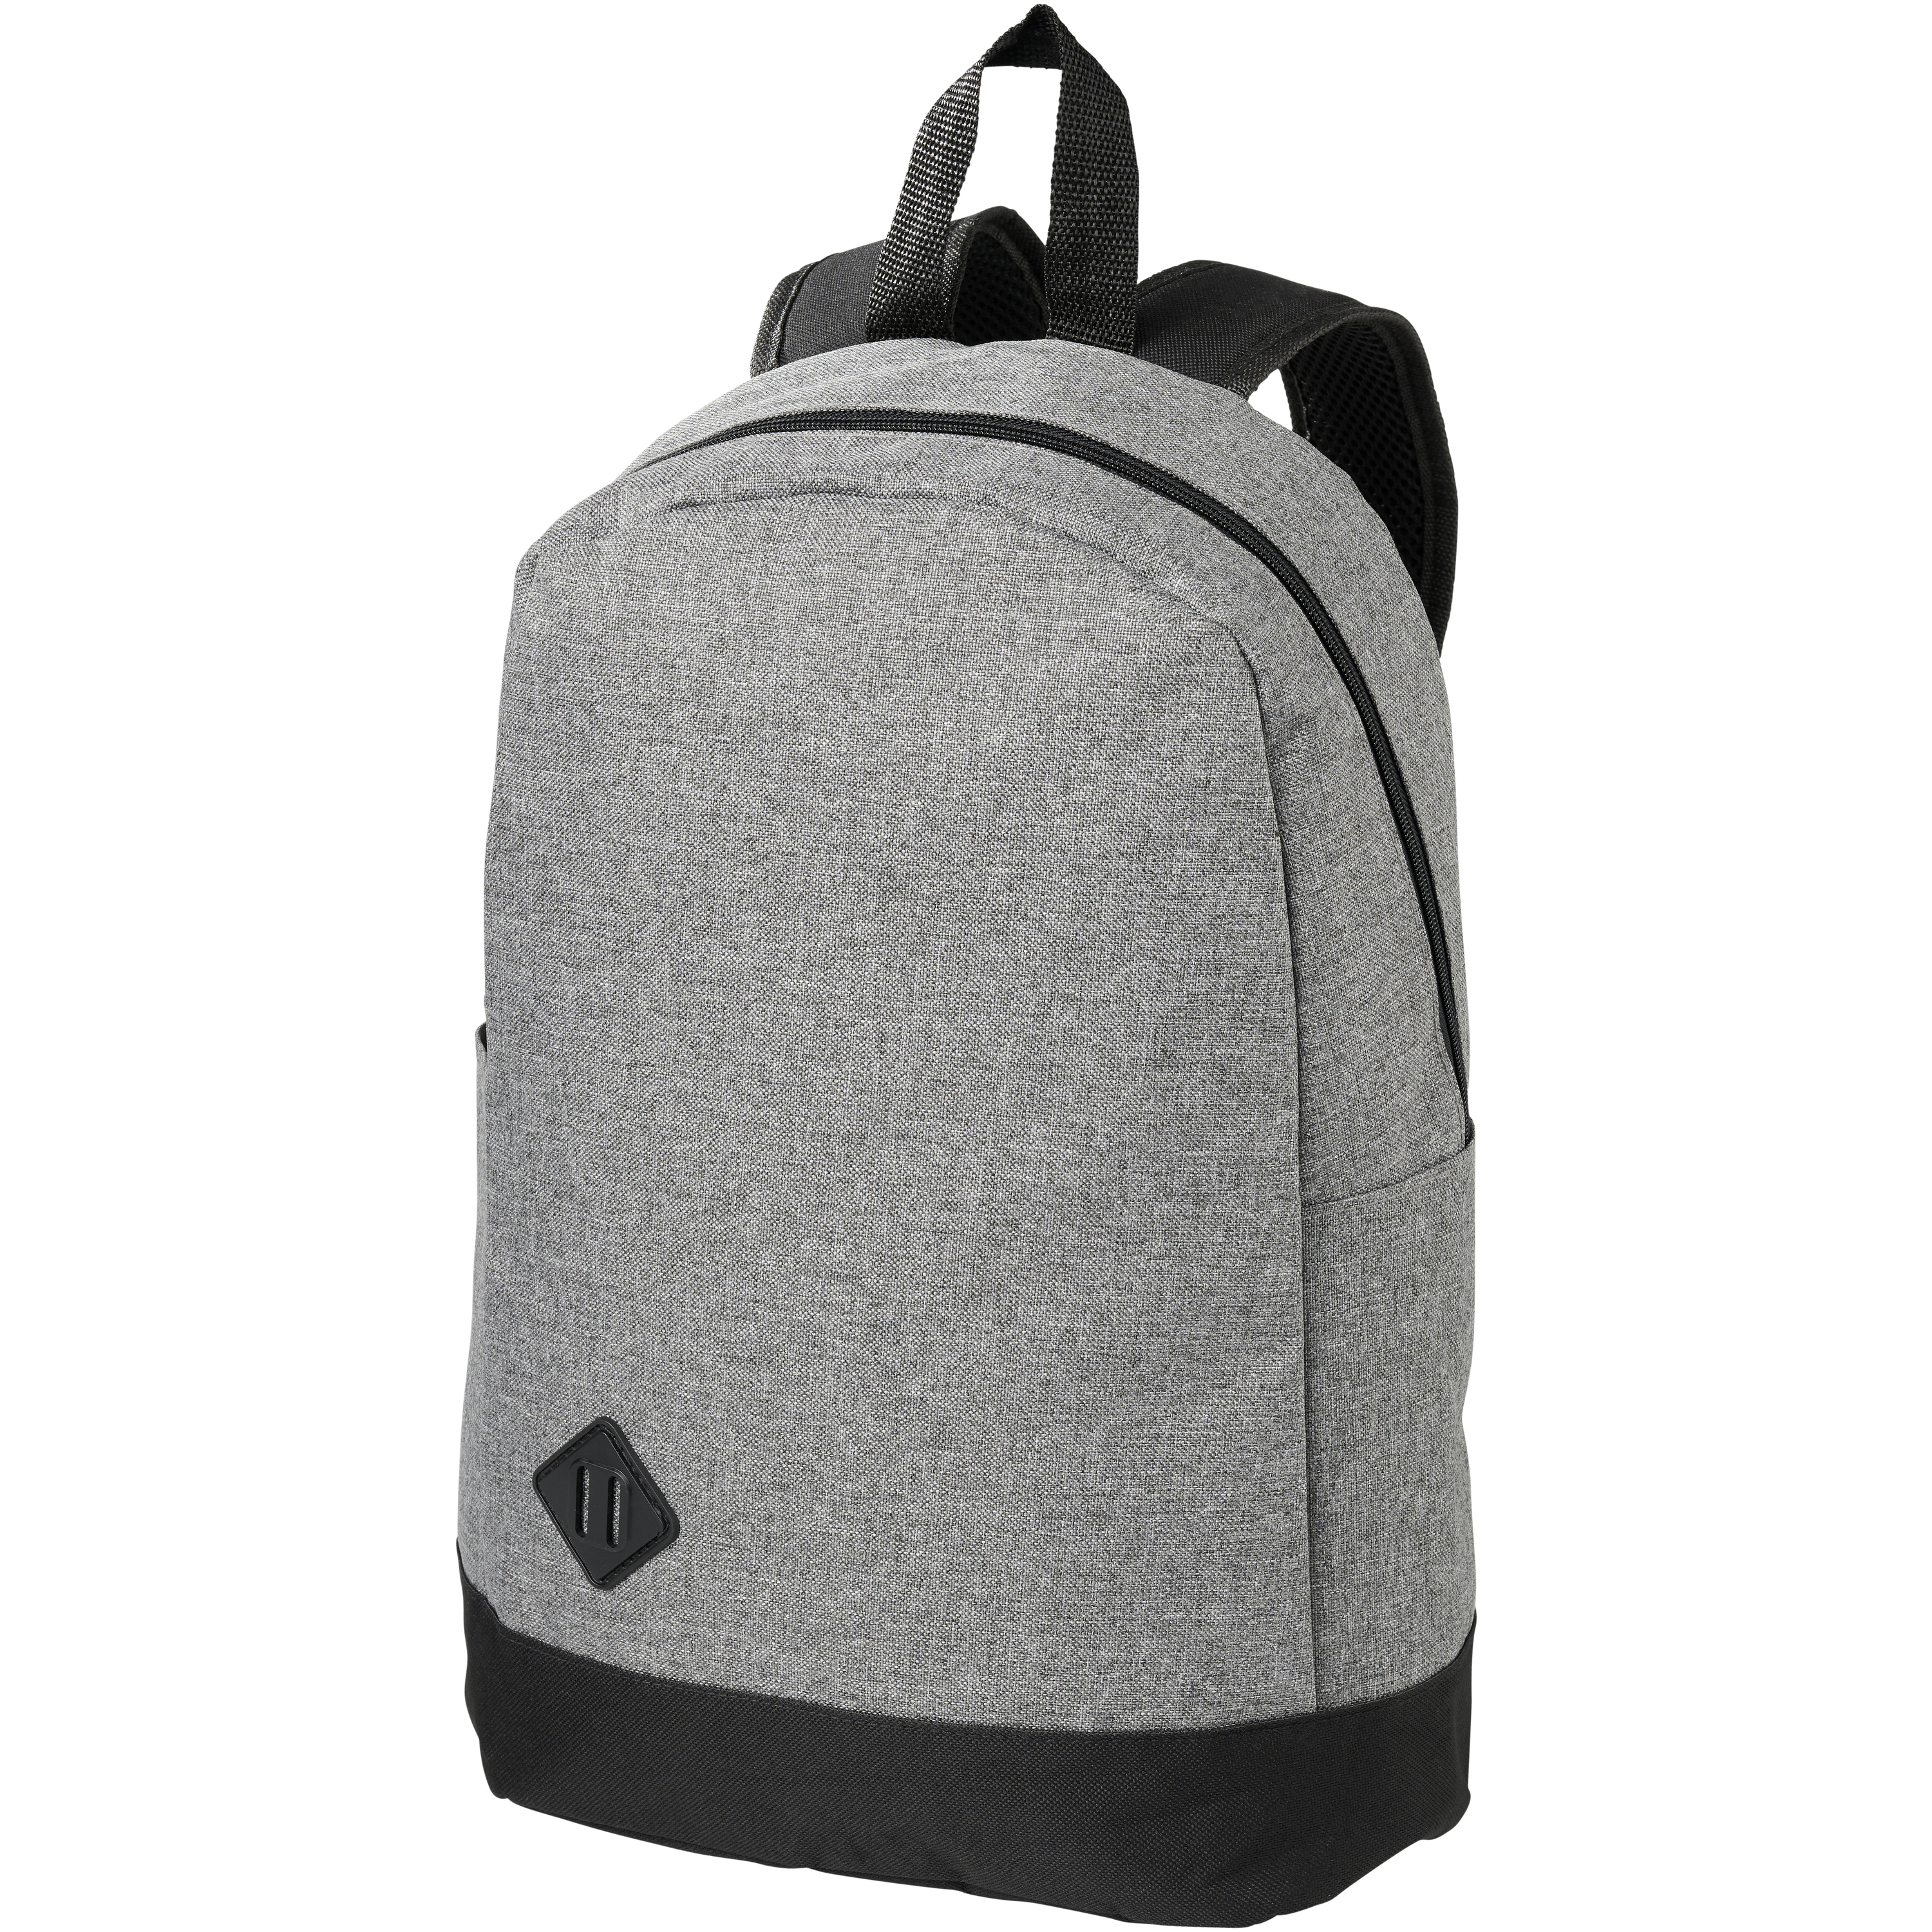 Dome 15" laptop backpack 15L